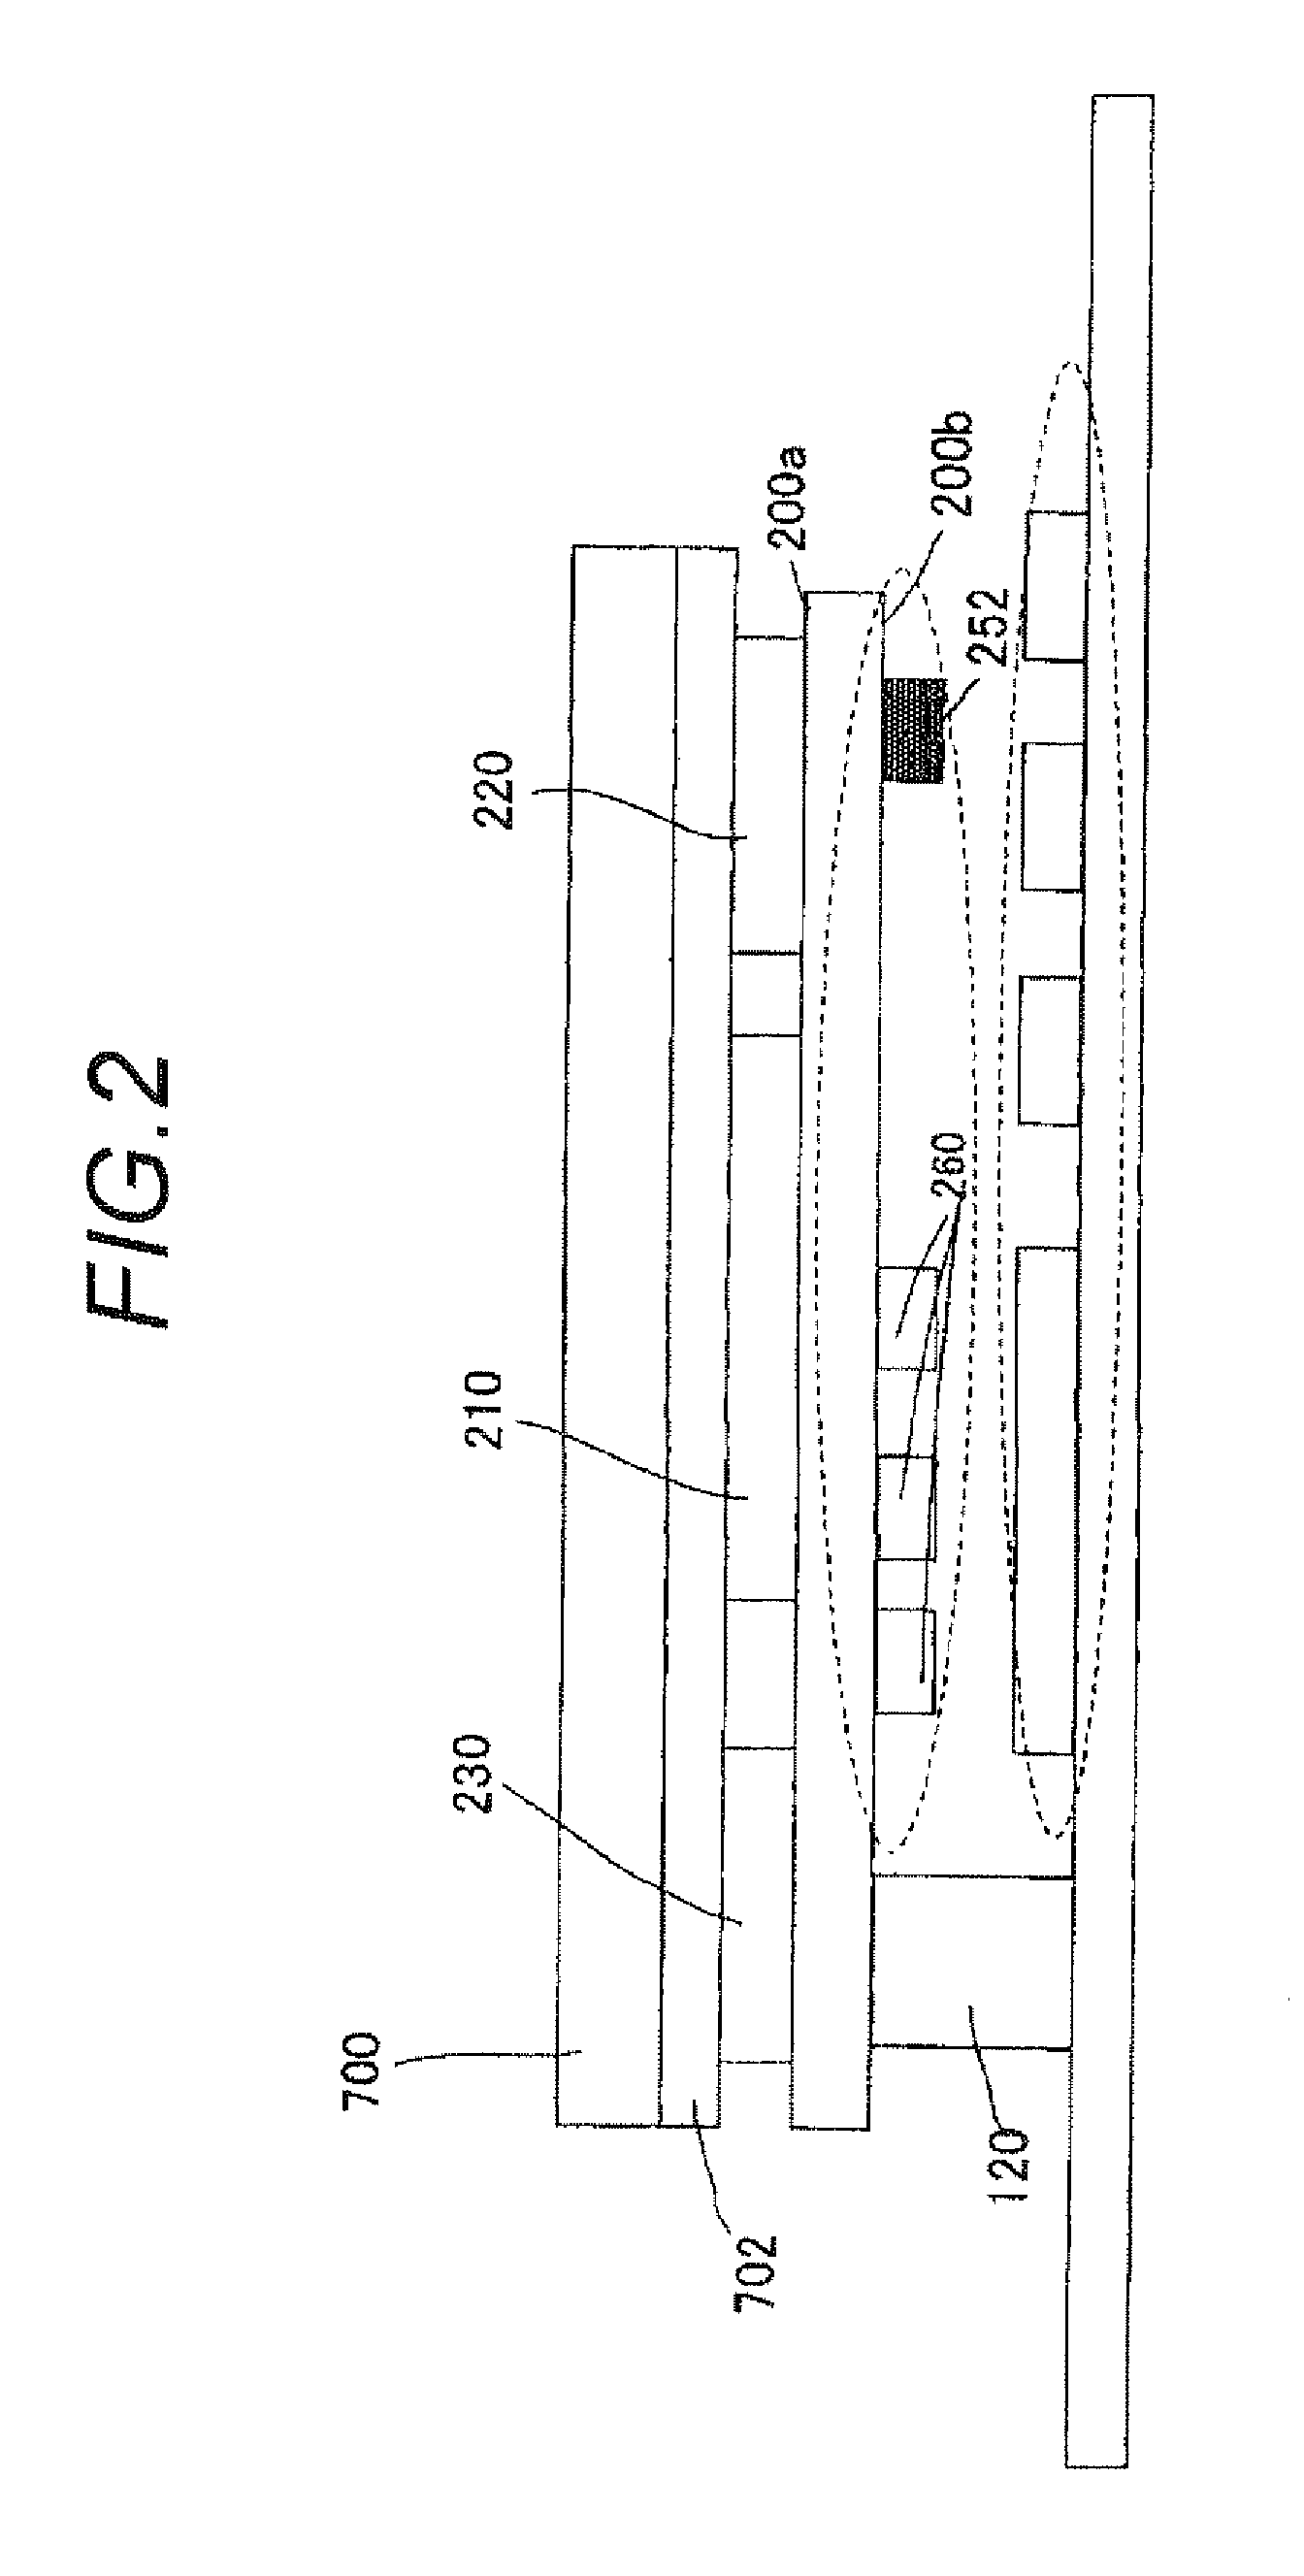 Electronic circuit board and power line communication apparatus using it